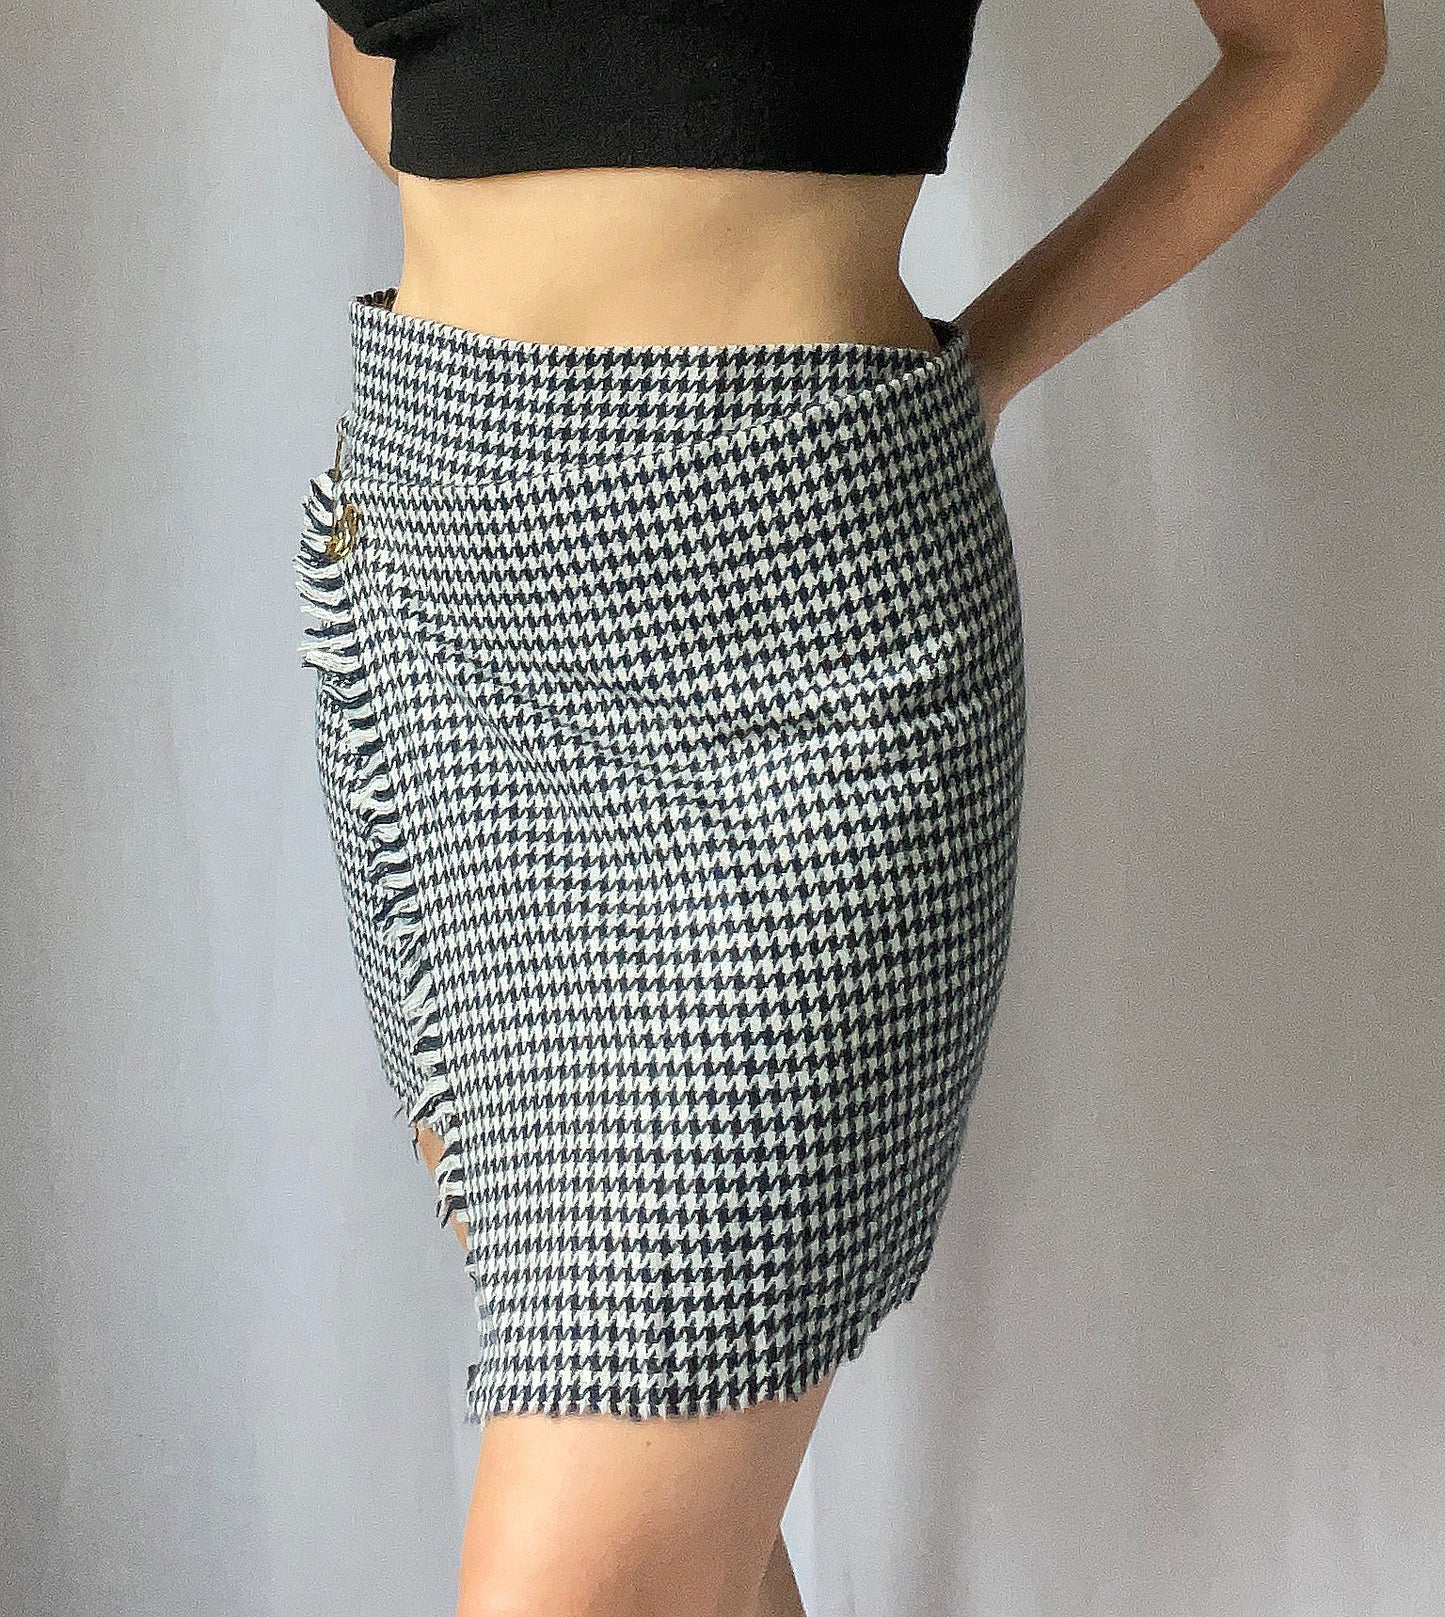 VINTAGE WOOL WRAP SKIRT WITH SAFETY PIN CLOSURE | XS-M